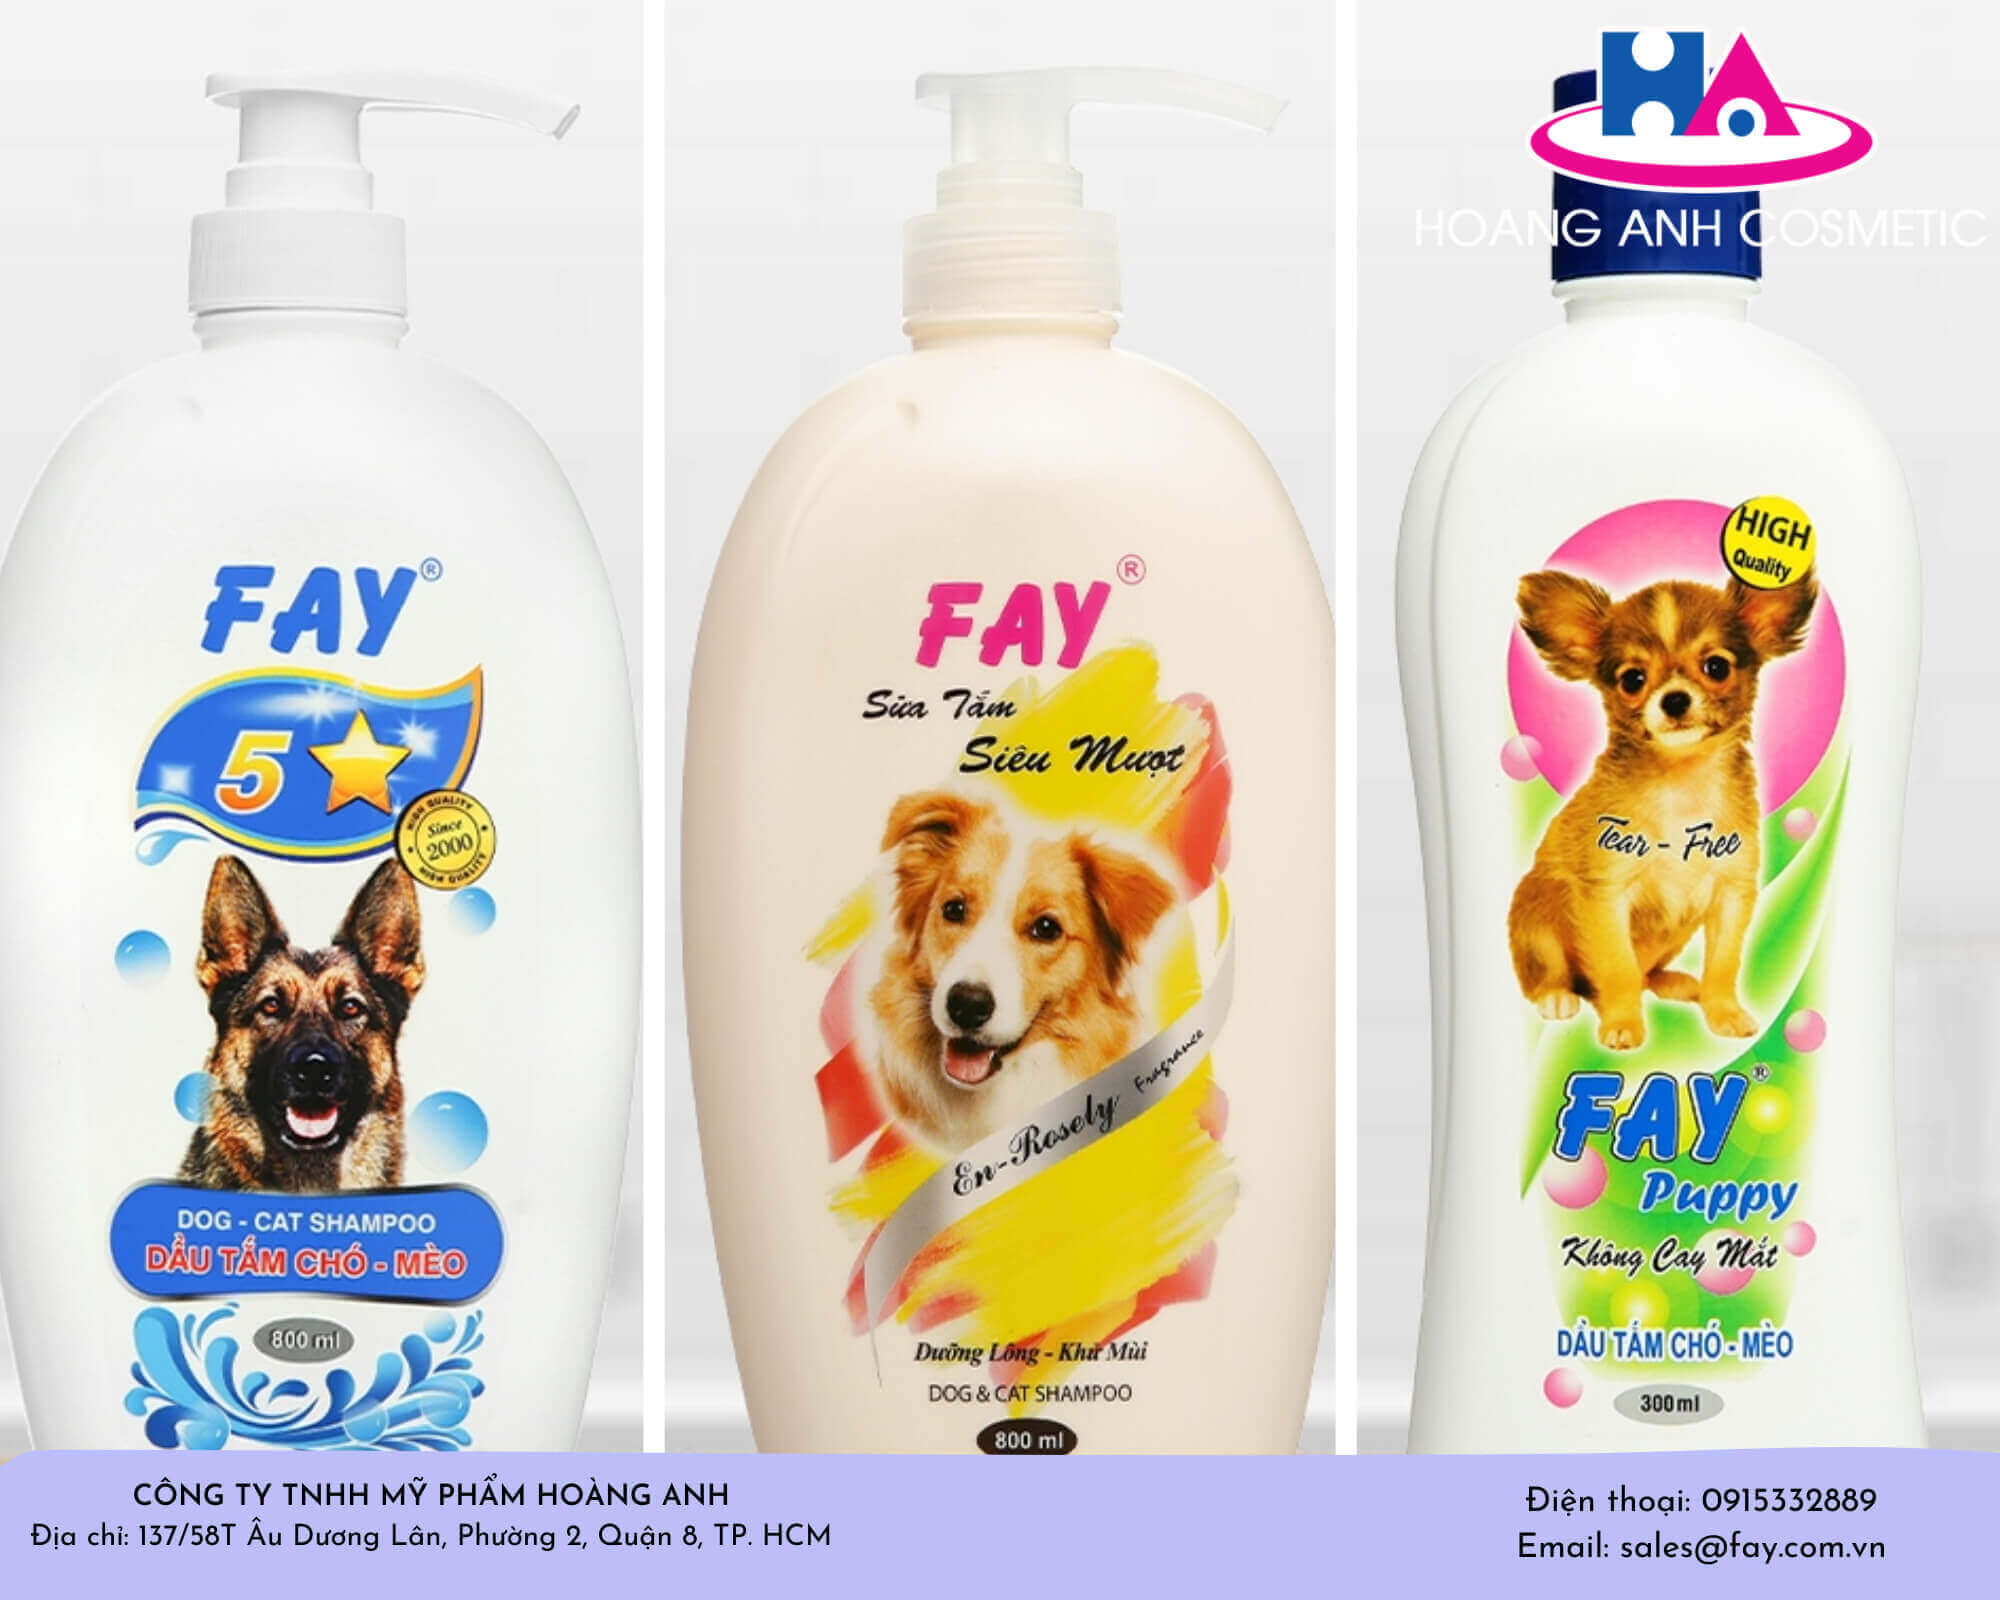 Top 4 Fay dog and cat shower gel is super smooth, does not irritate the skin